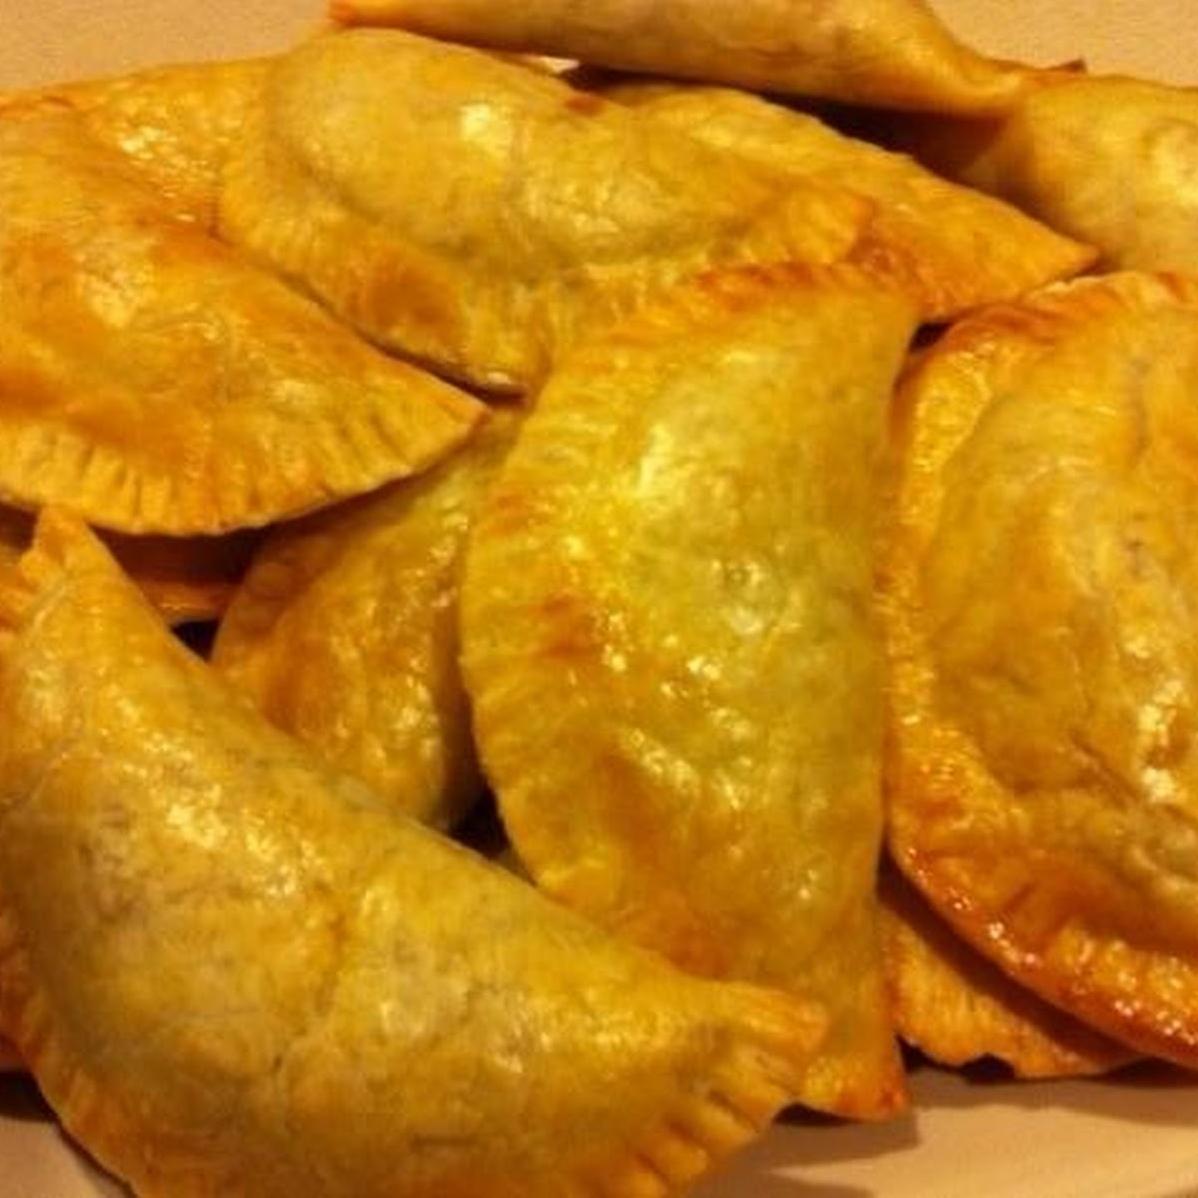  Get a taste of Brazil with these authentic beef turnovers